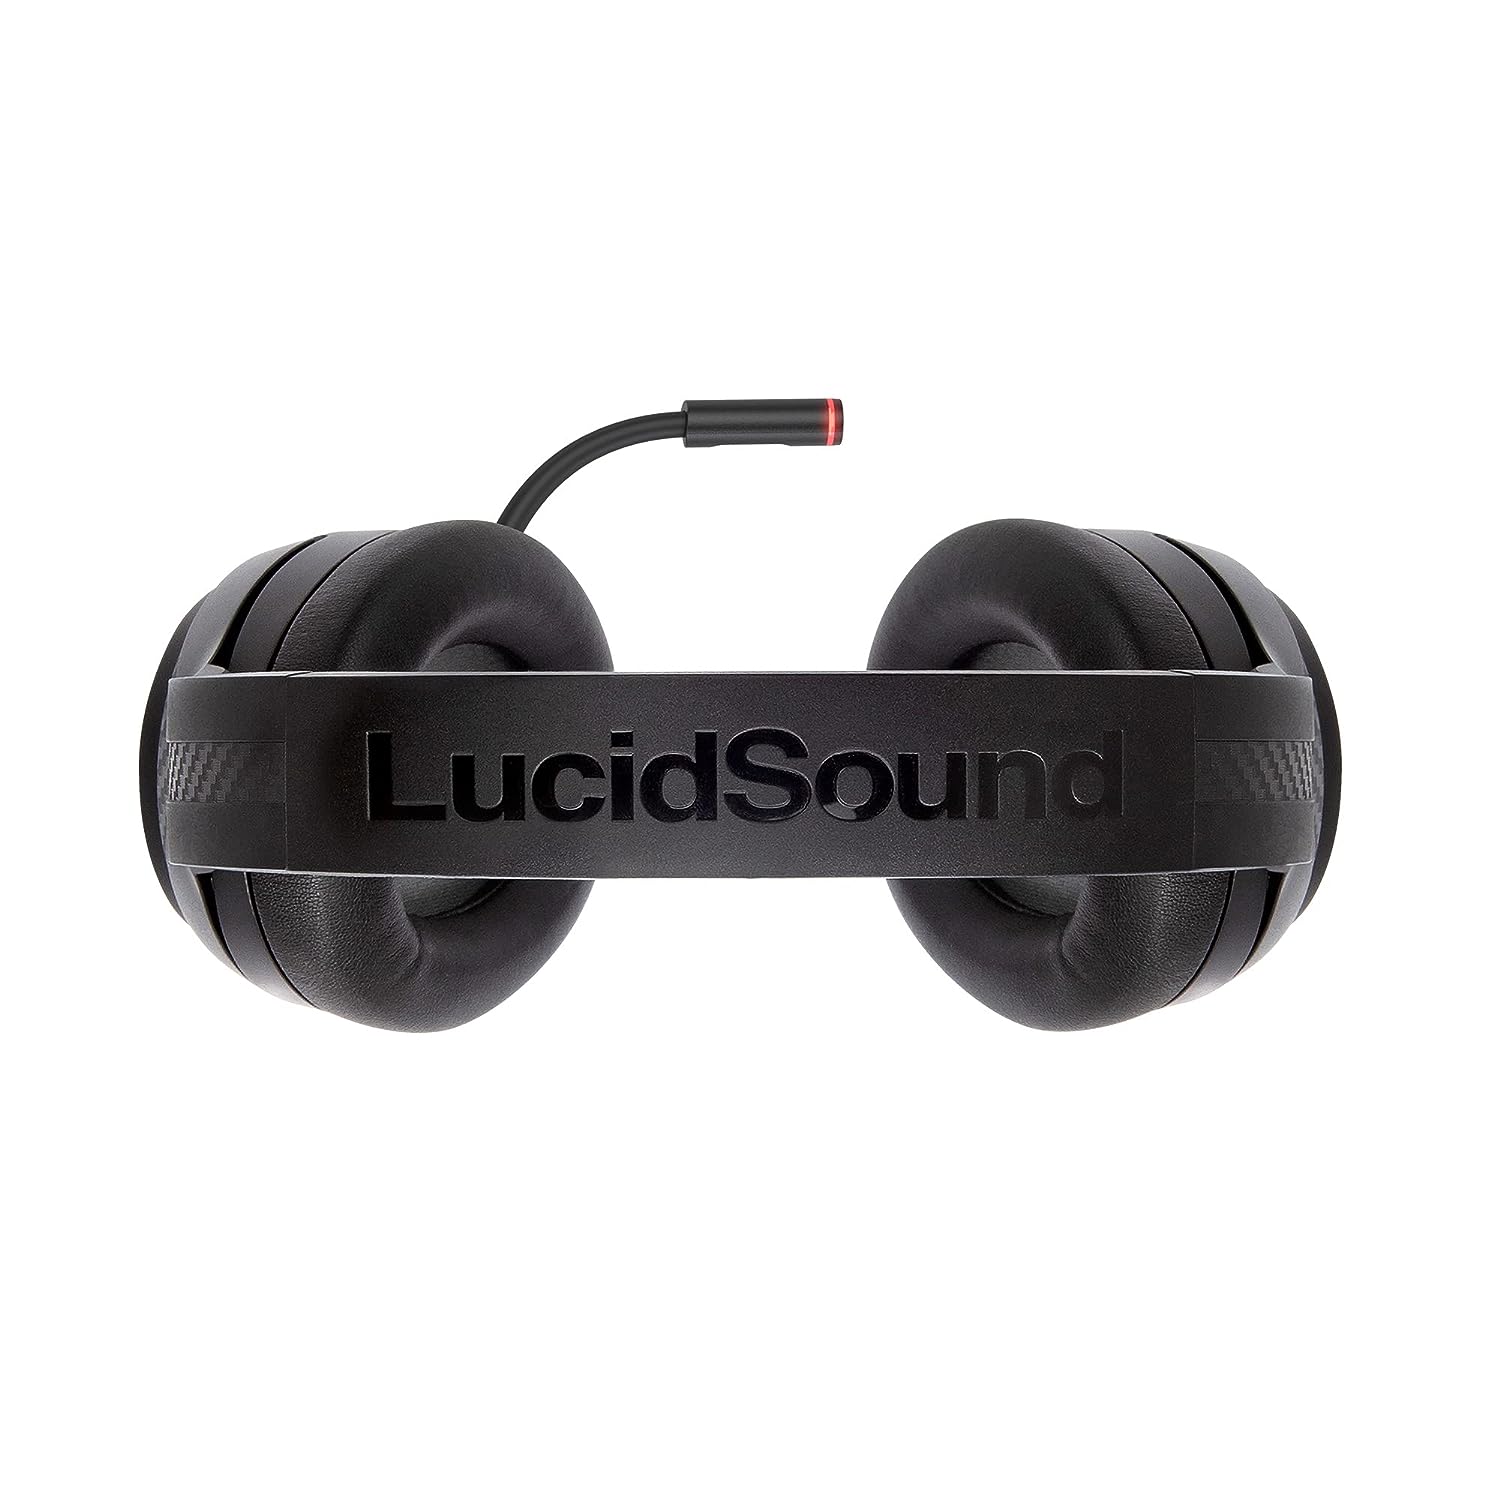 PowerA LucidSound LS15X Wireless Gaming Headset for Xbox One/Series X|S - Black (New)